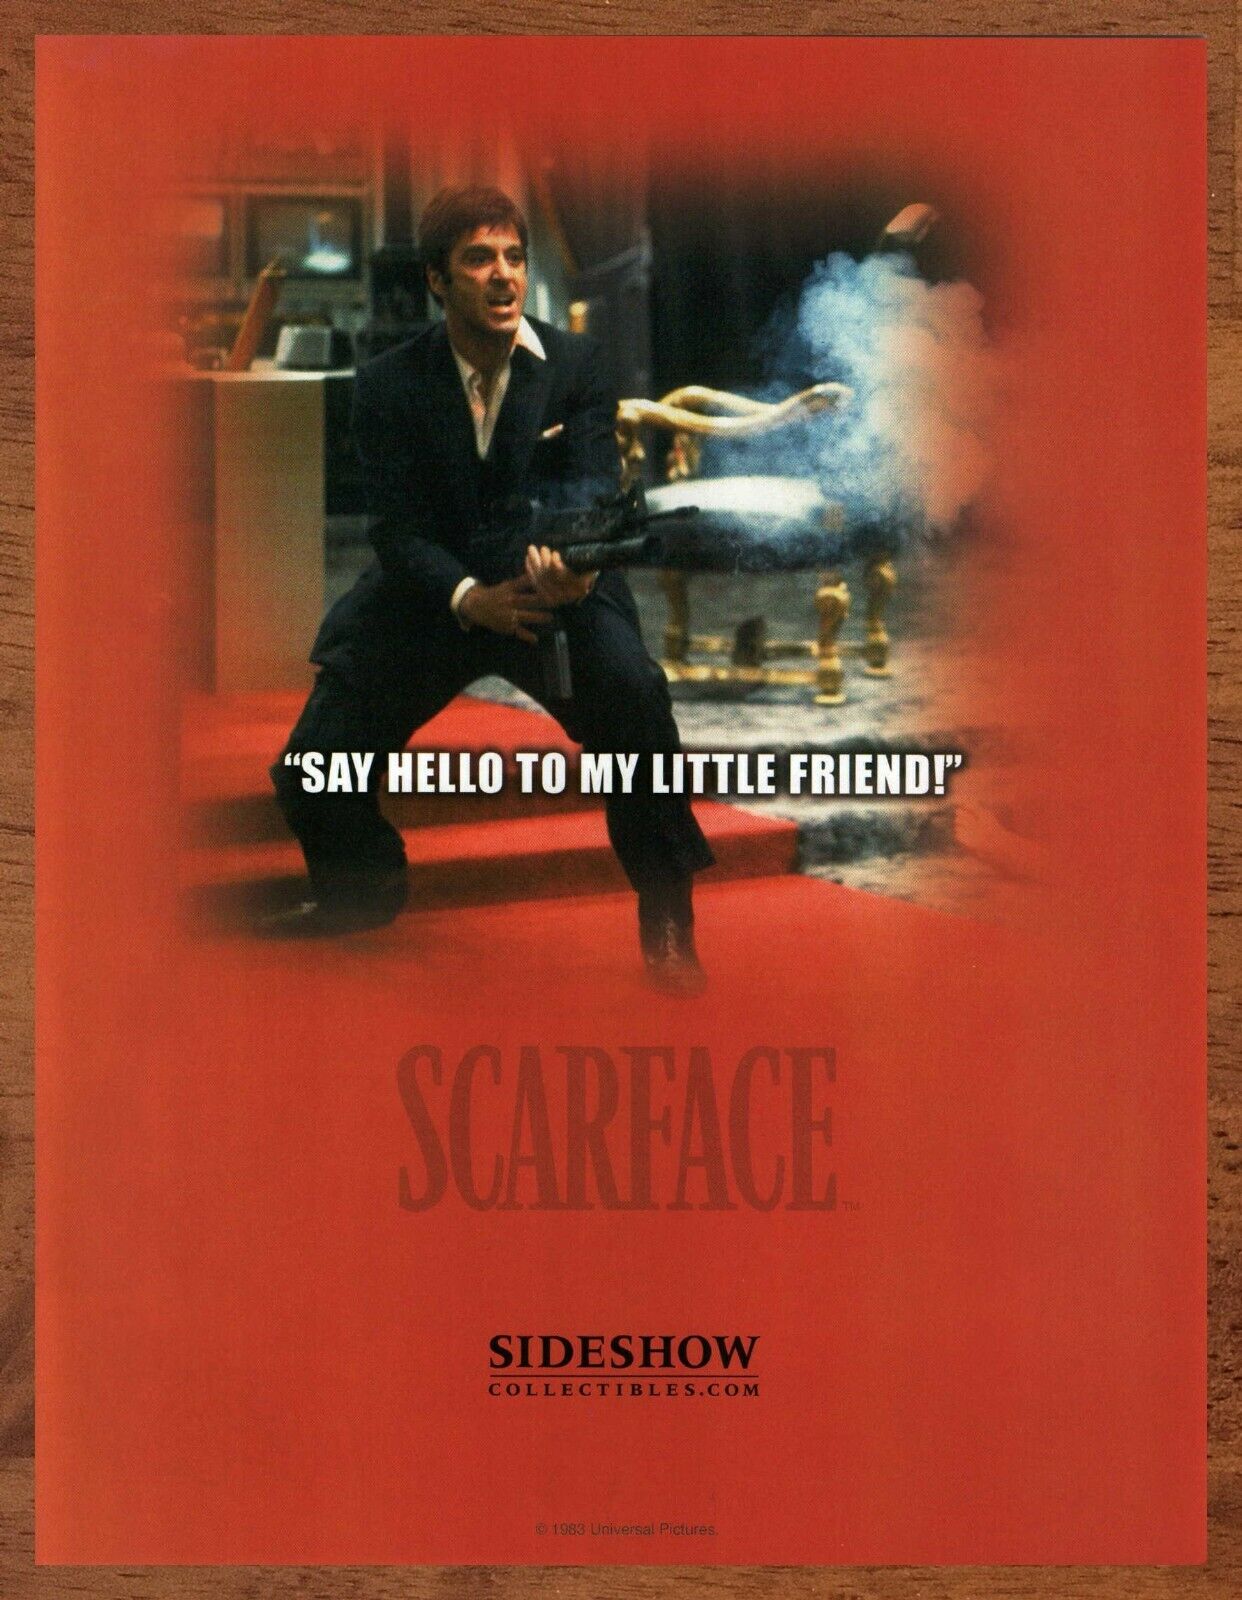 2004 Sideshow Collectibles Scarface Vintage Print Ad/Poster Al Pacino Art Décor 